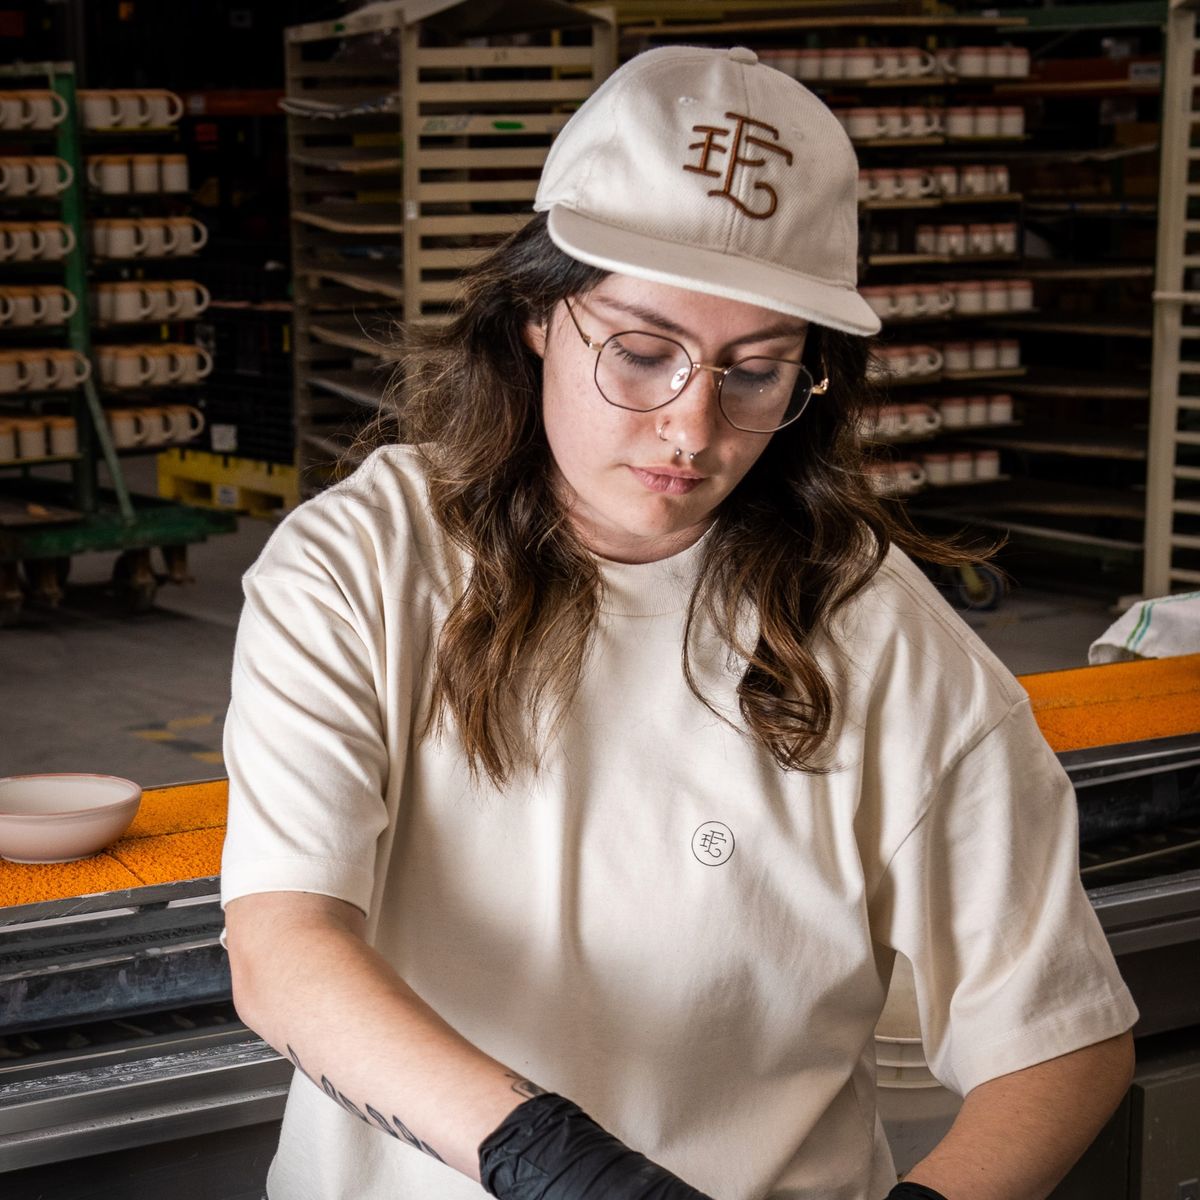 In a factory warehouse setting, a person wears the white denim baseball hat while handling a ceramic bowl on the production line.